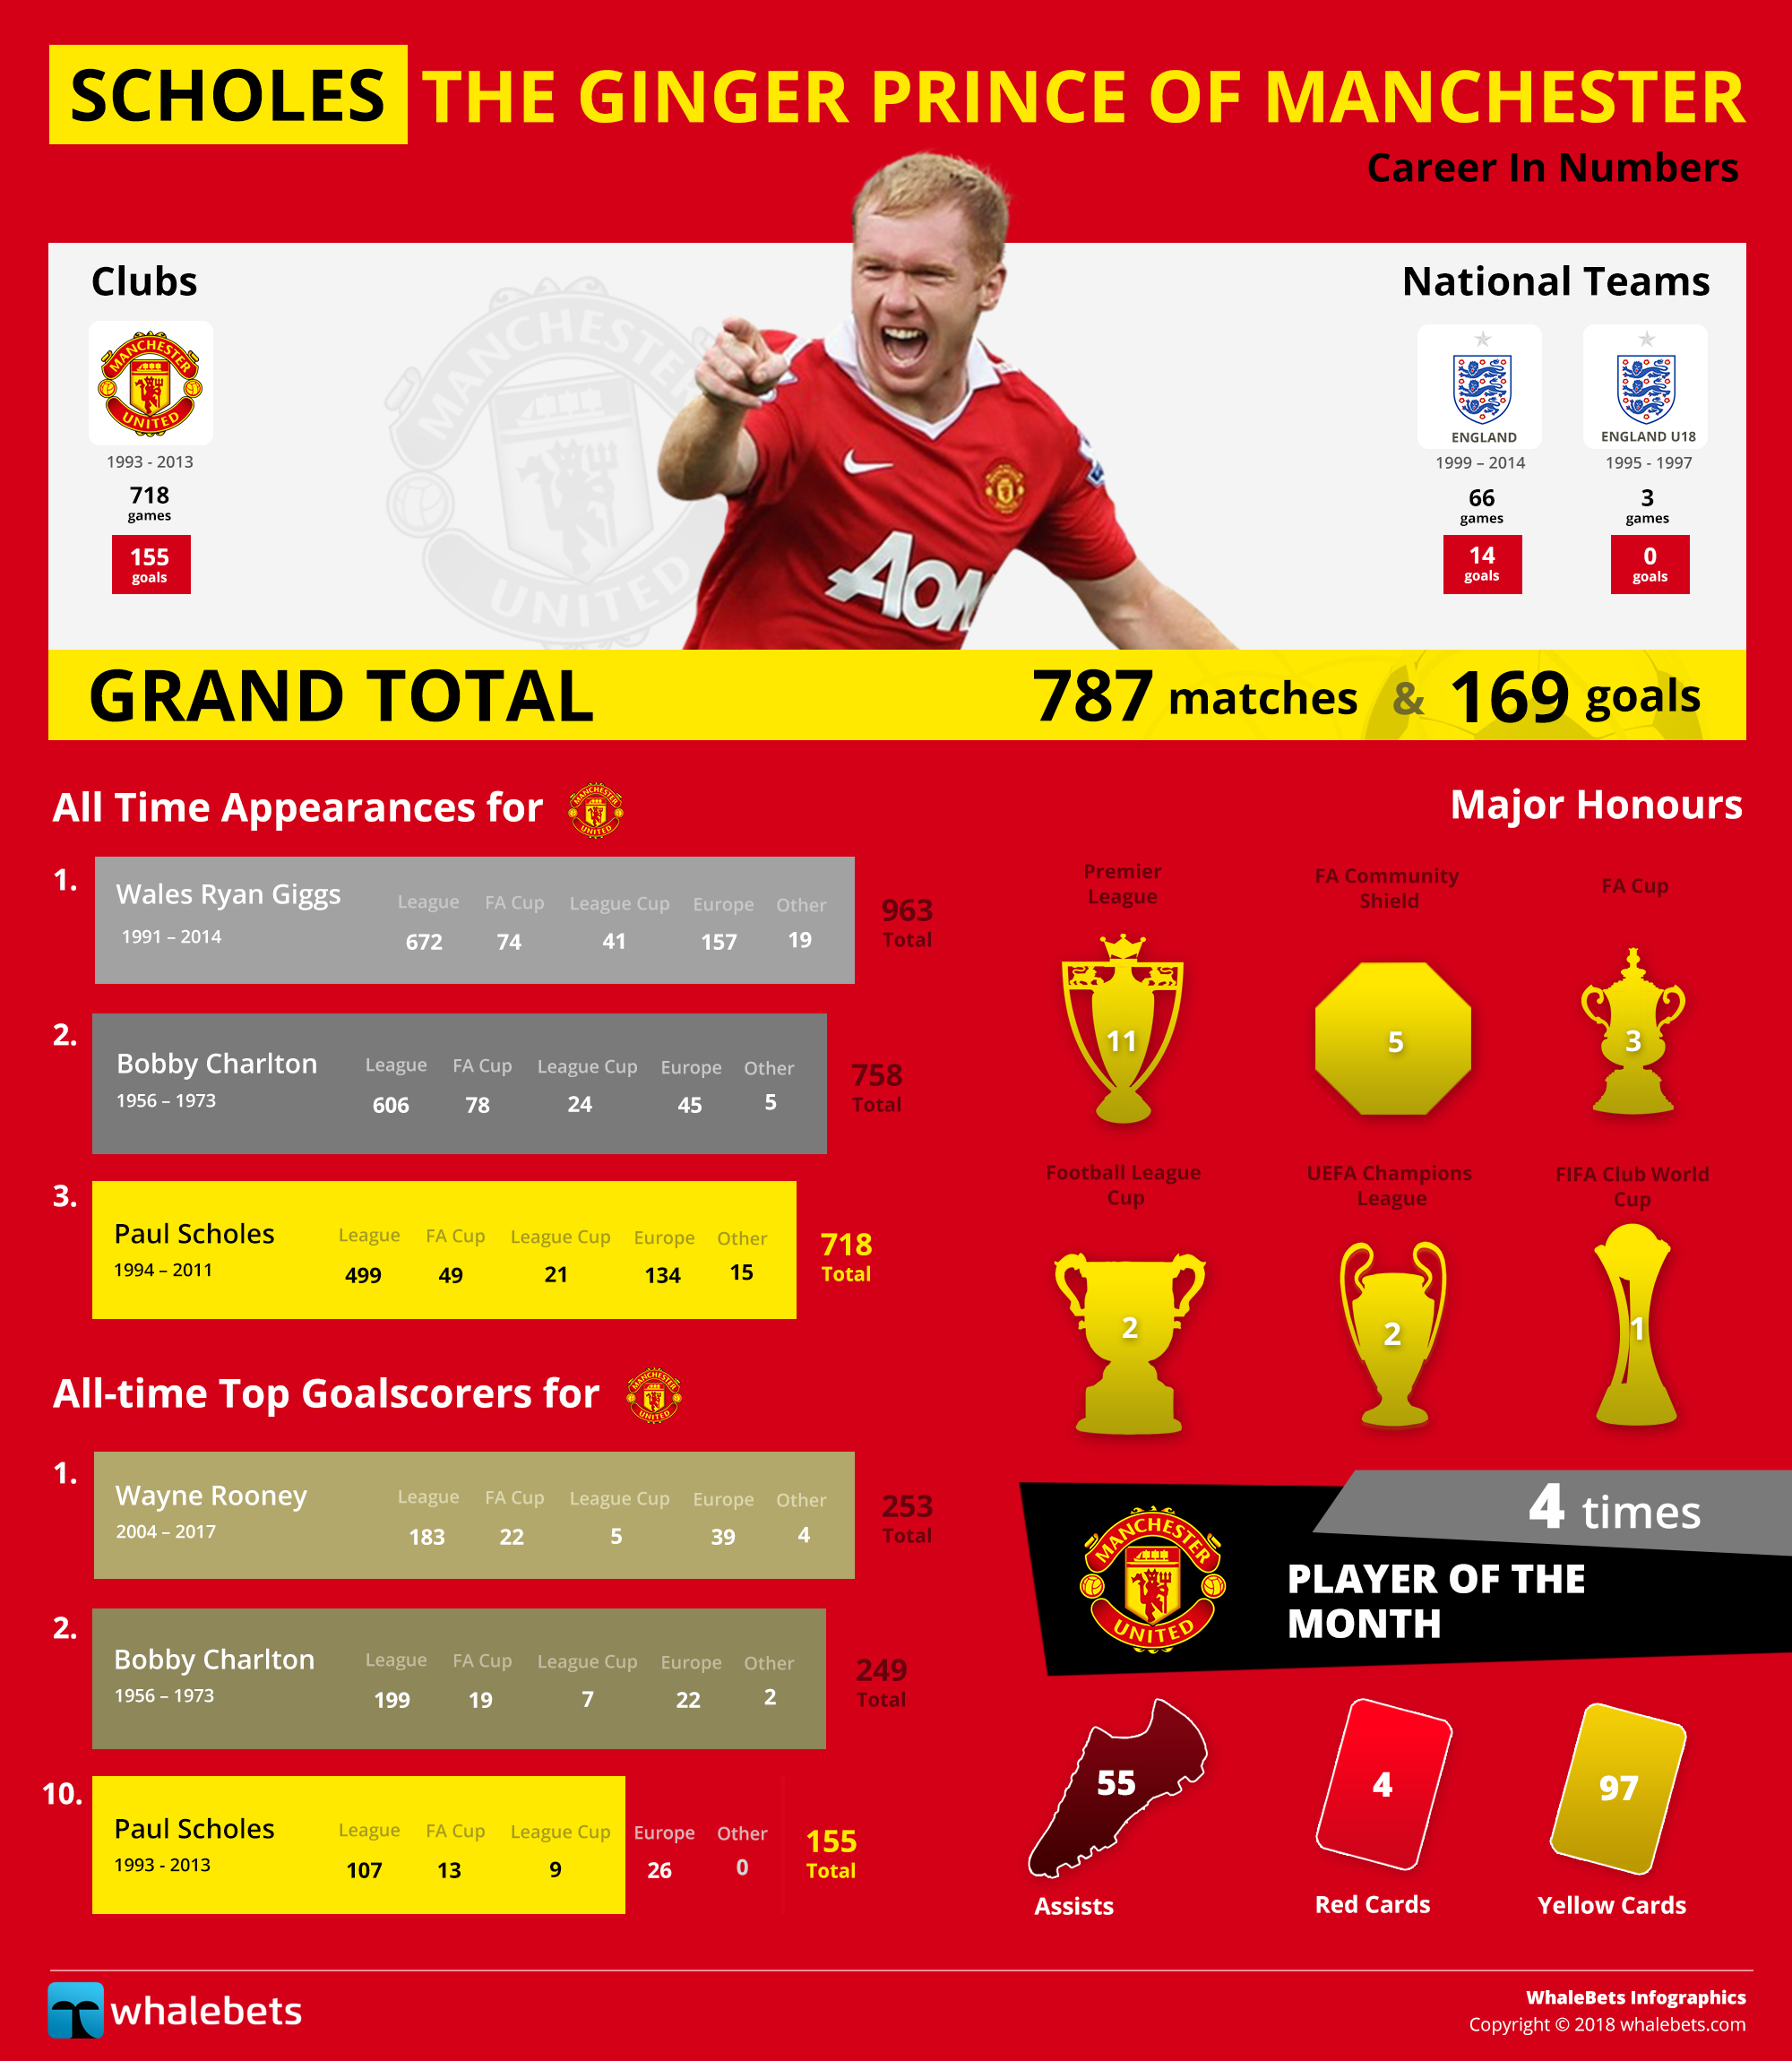 Paul Scholes - The Ginger Prince of Manchester United